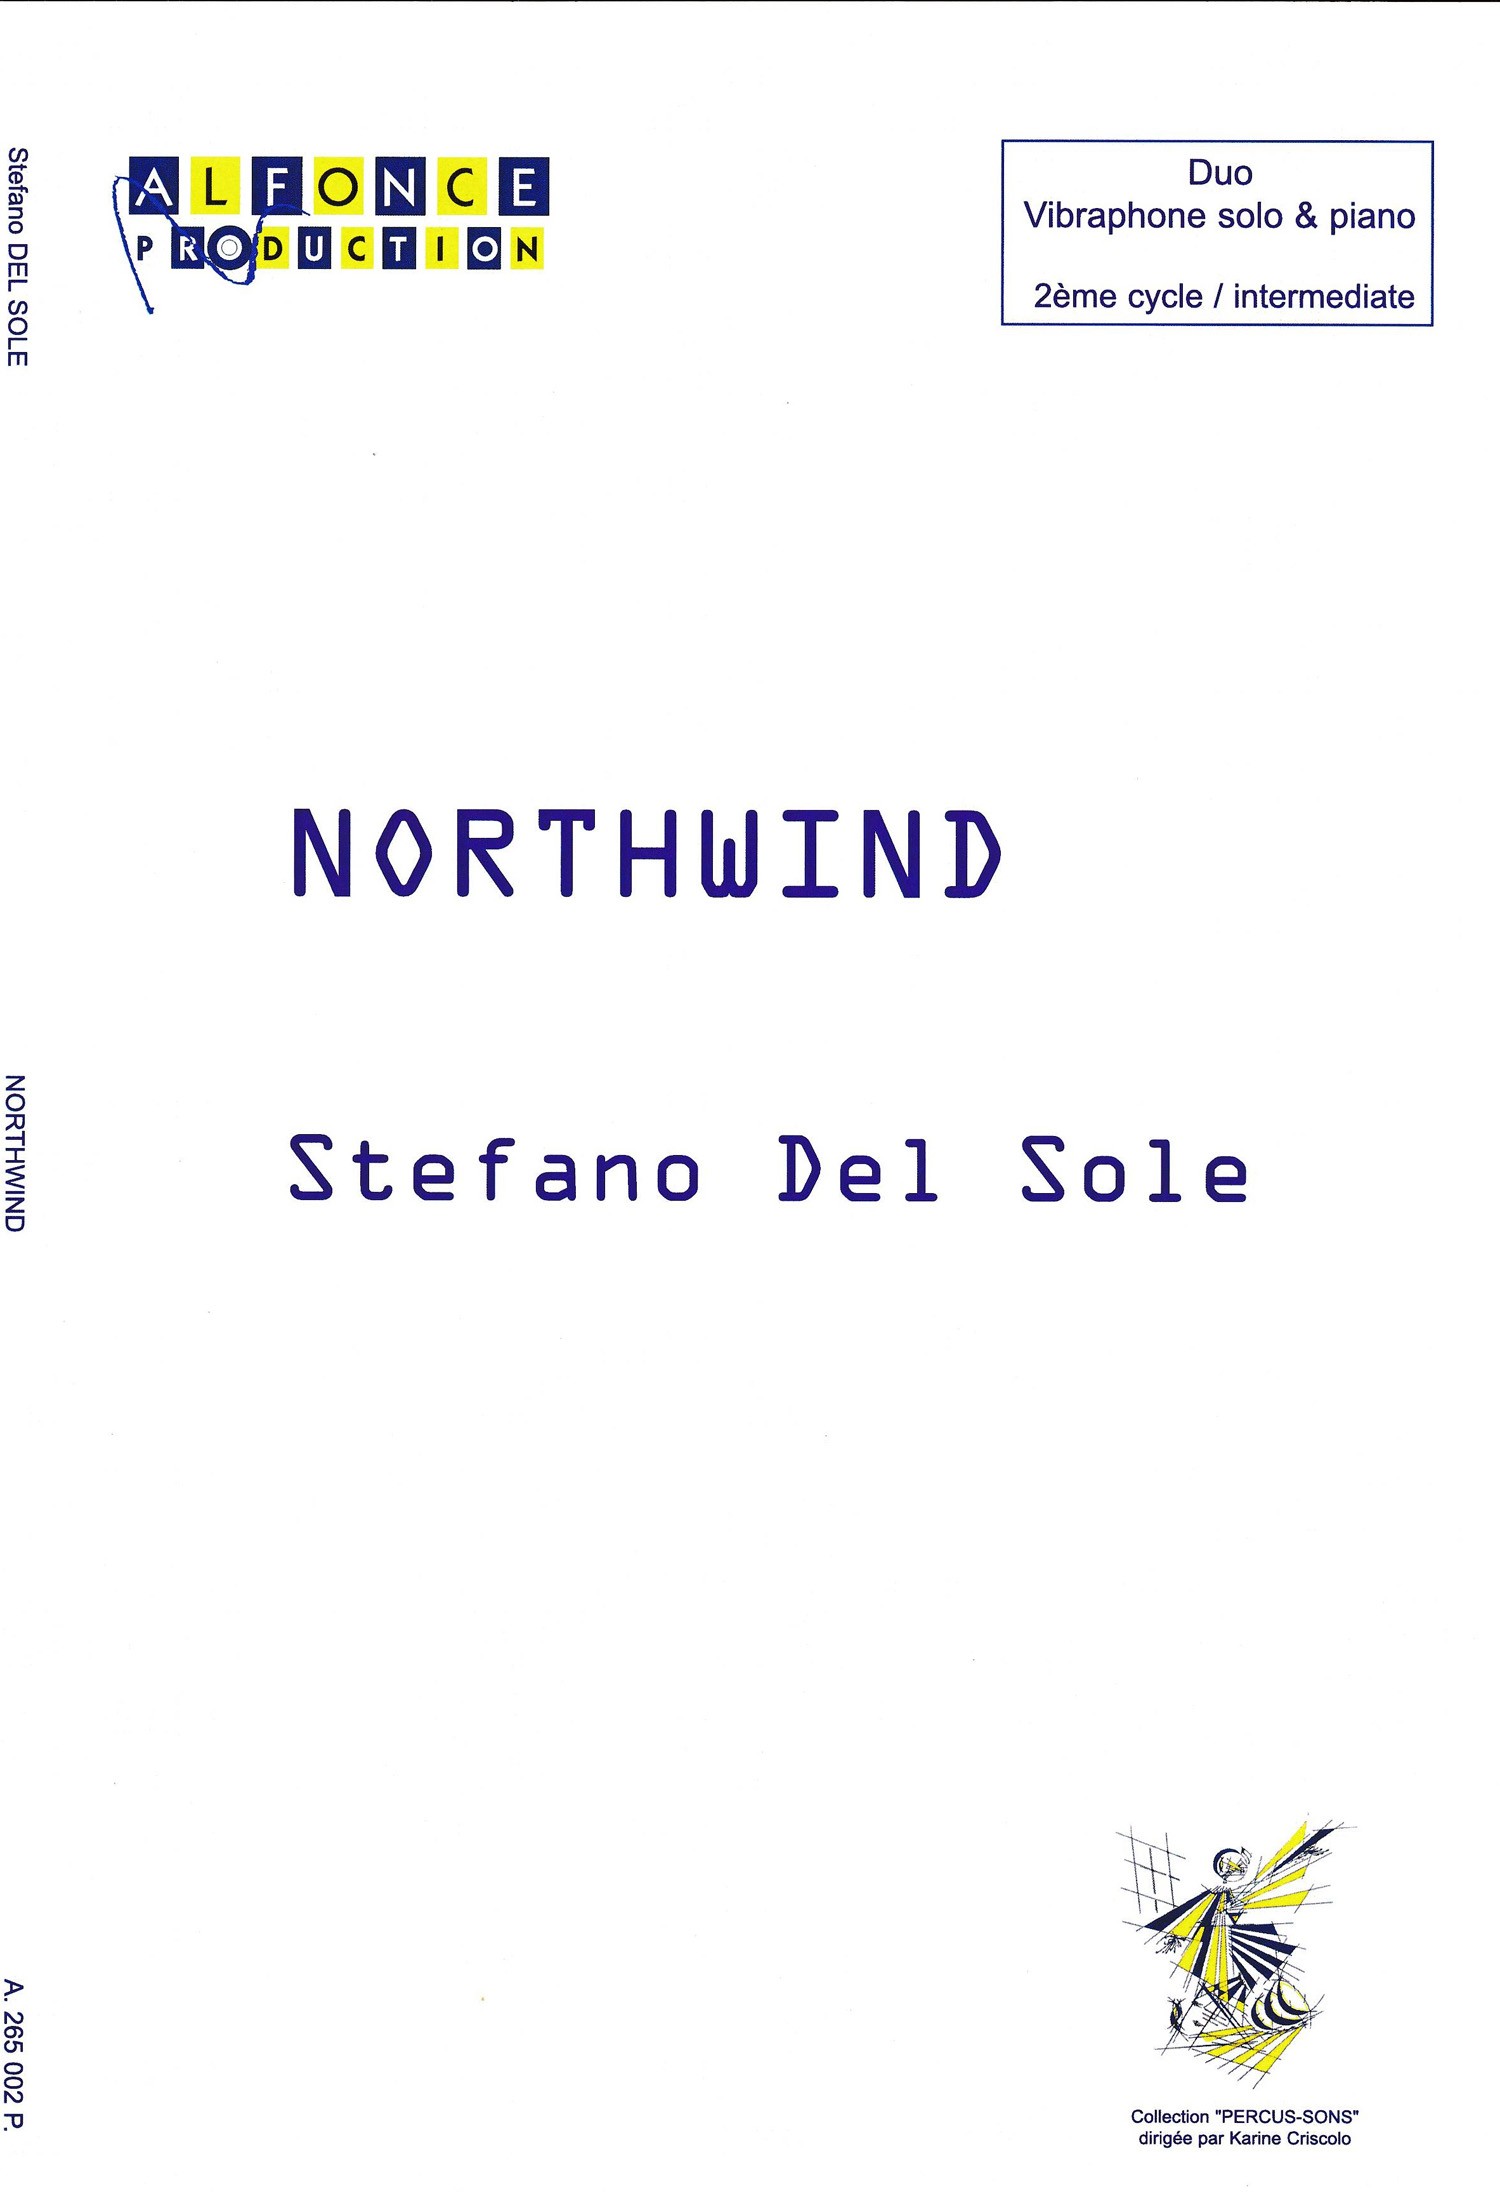 Northwind by Stefano Del Sole